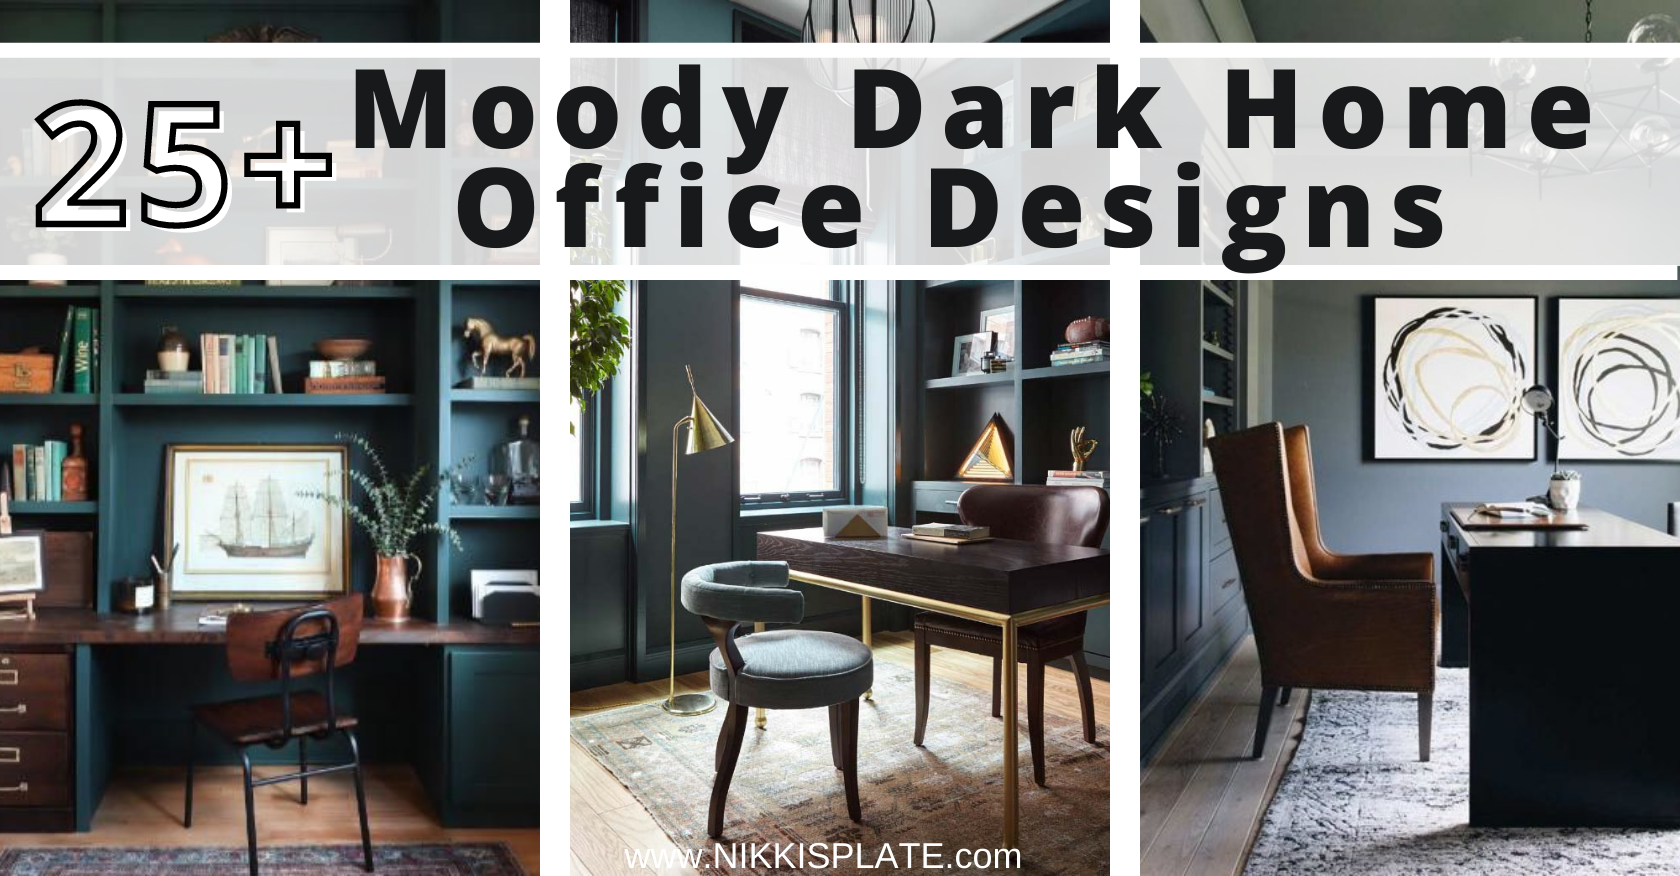 http://www.nikkisplate.com/wp-content/uploads/2022/08/Dark-Home-Office-Designs-for-a-Moody-Vibe.png